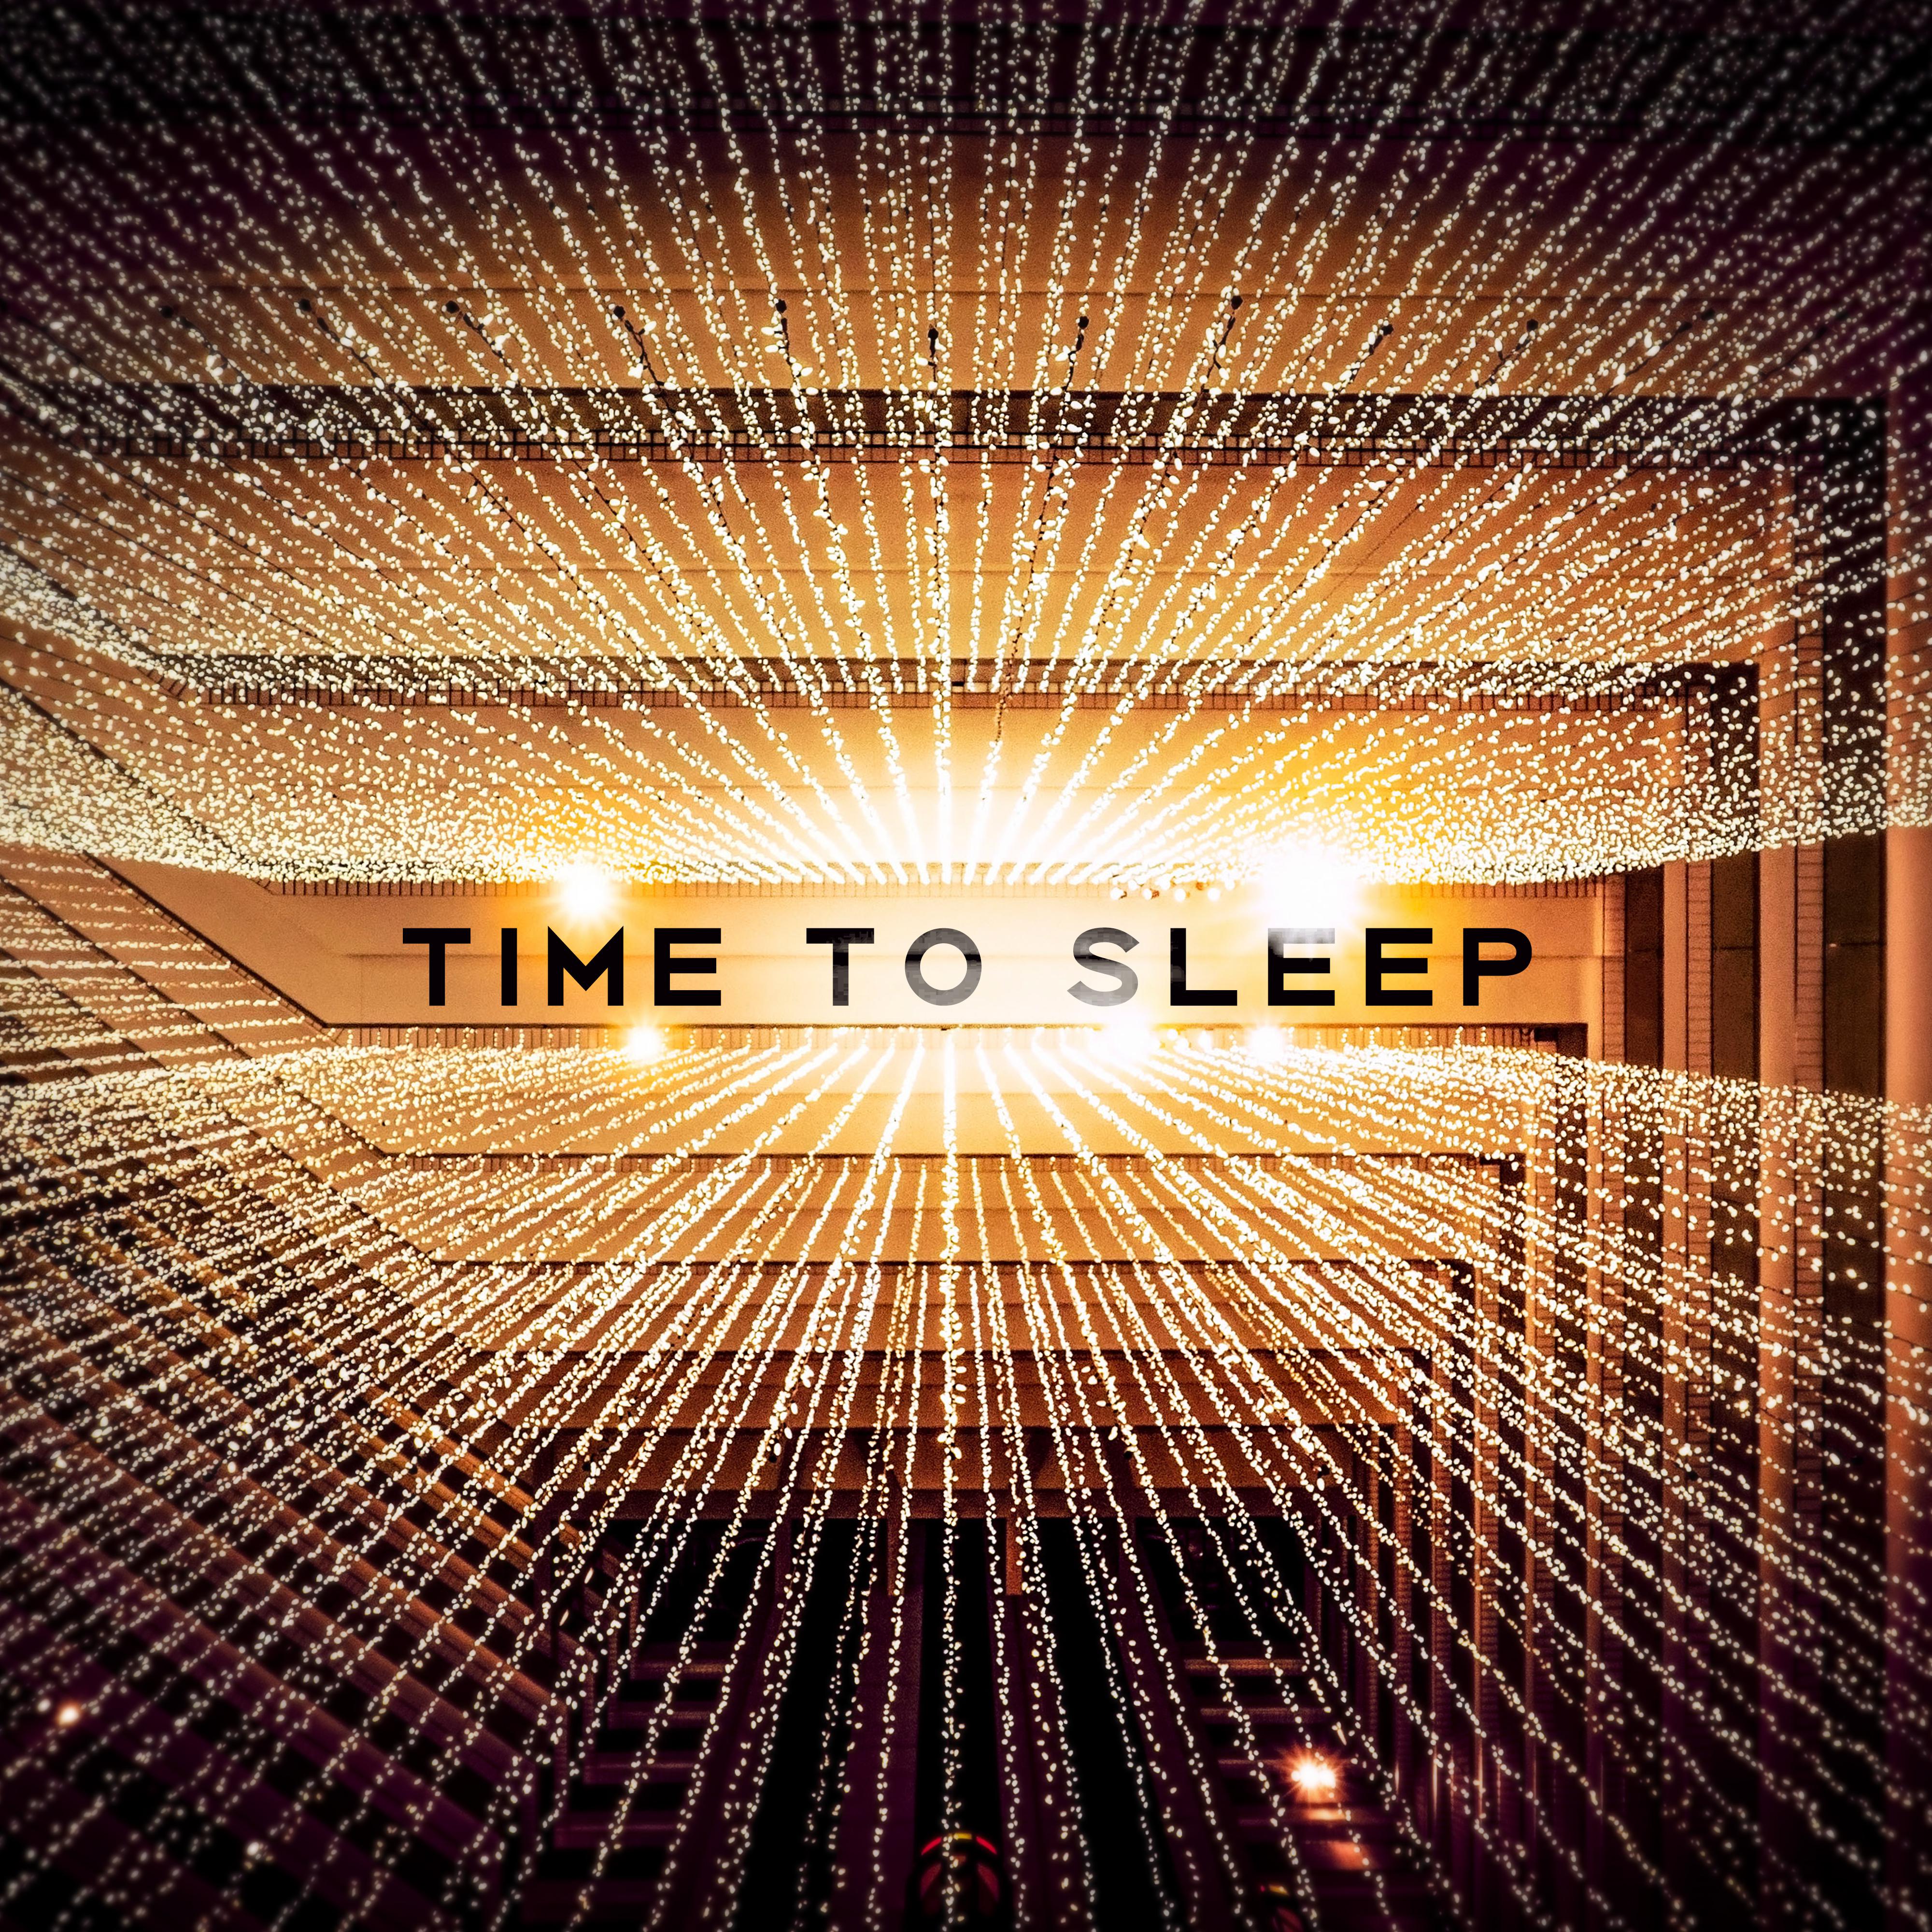 Time to Sleep – Relaxing Waves, Sleep Well All Night, Stress Relief, Music to Help You Fall Asleep